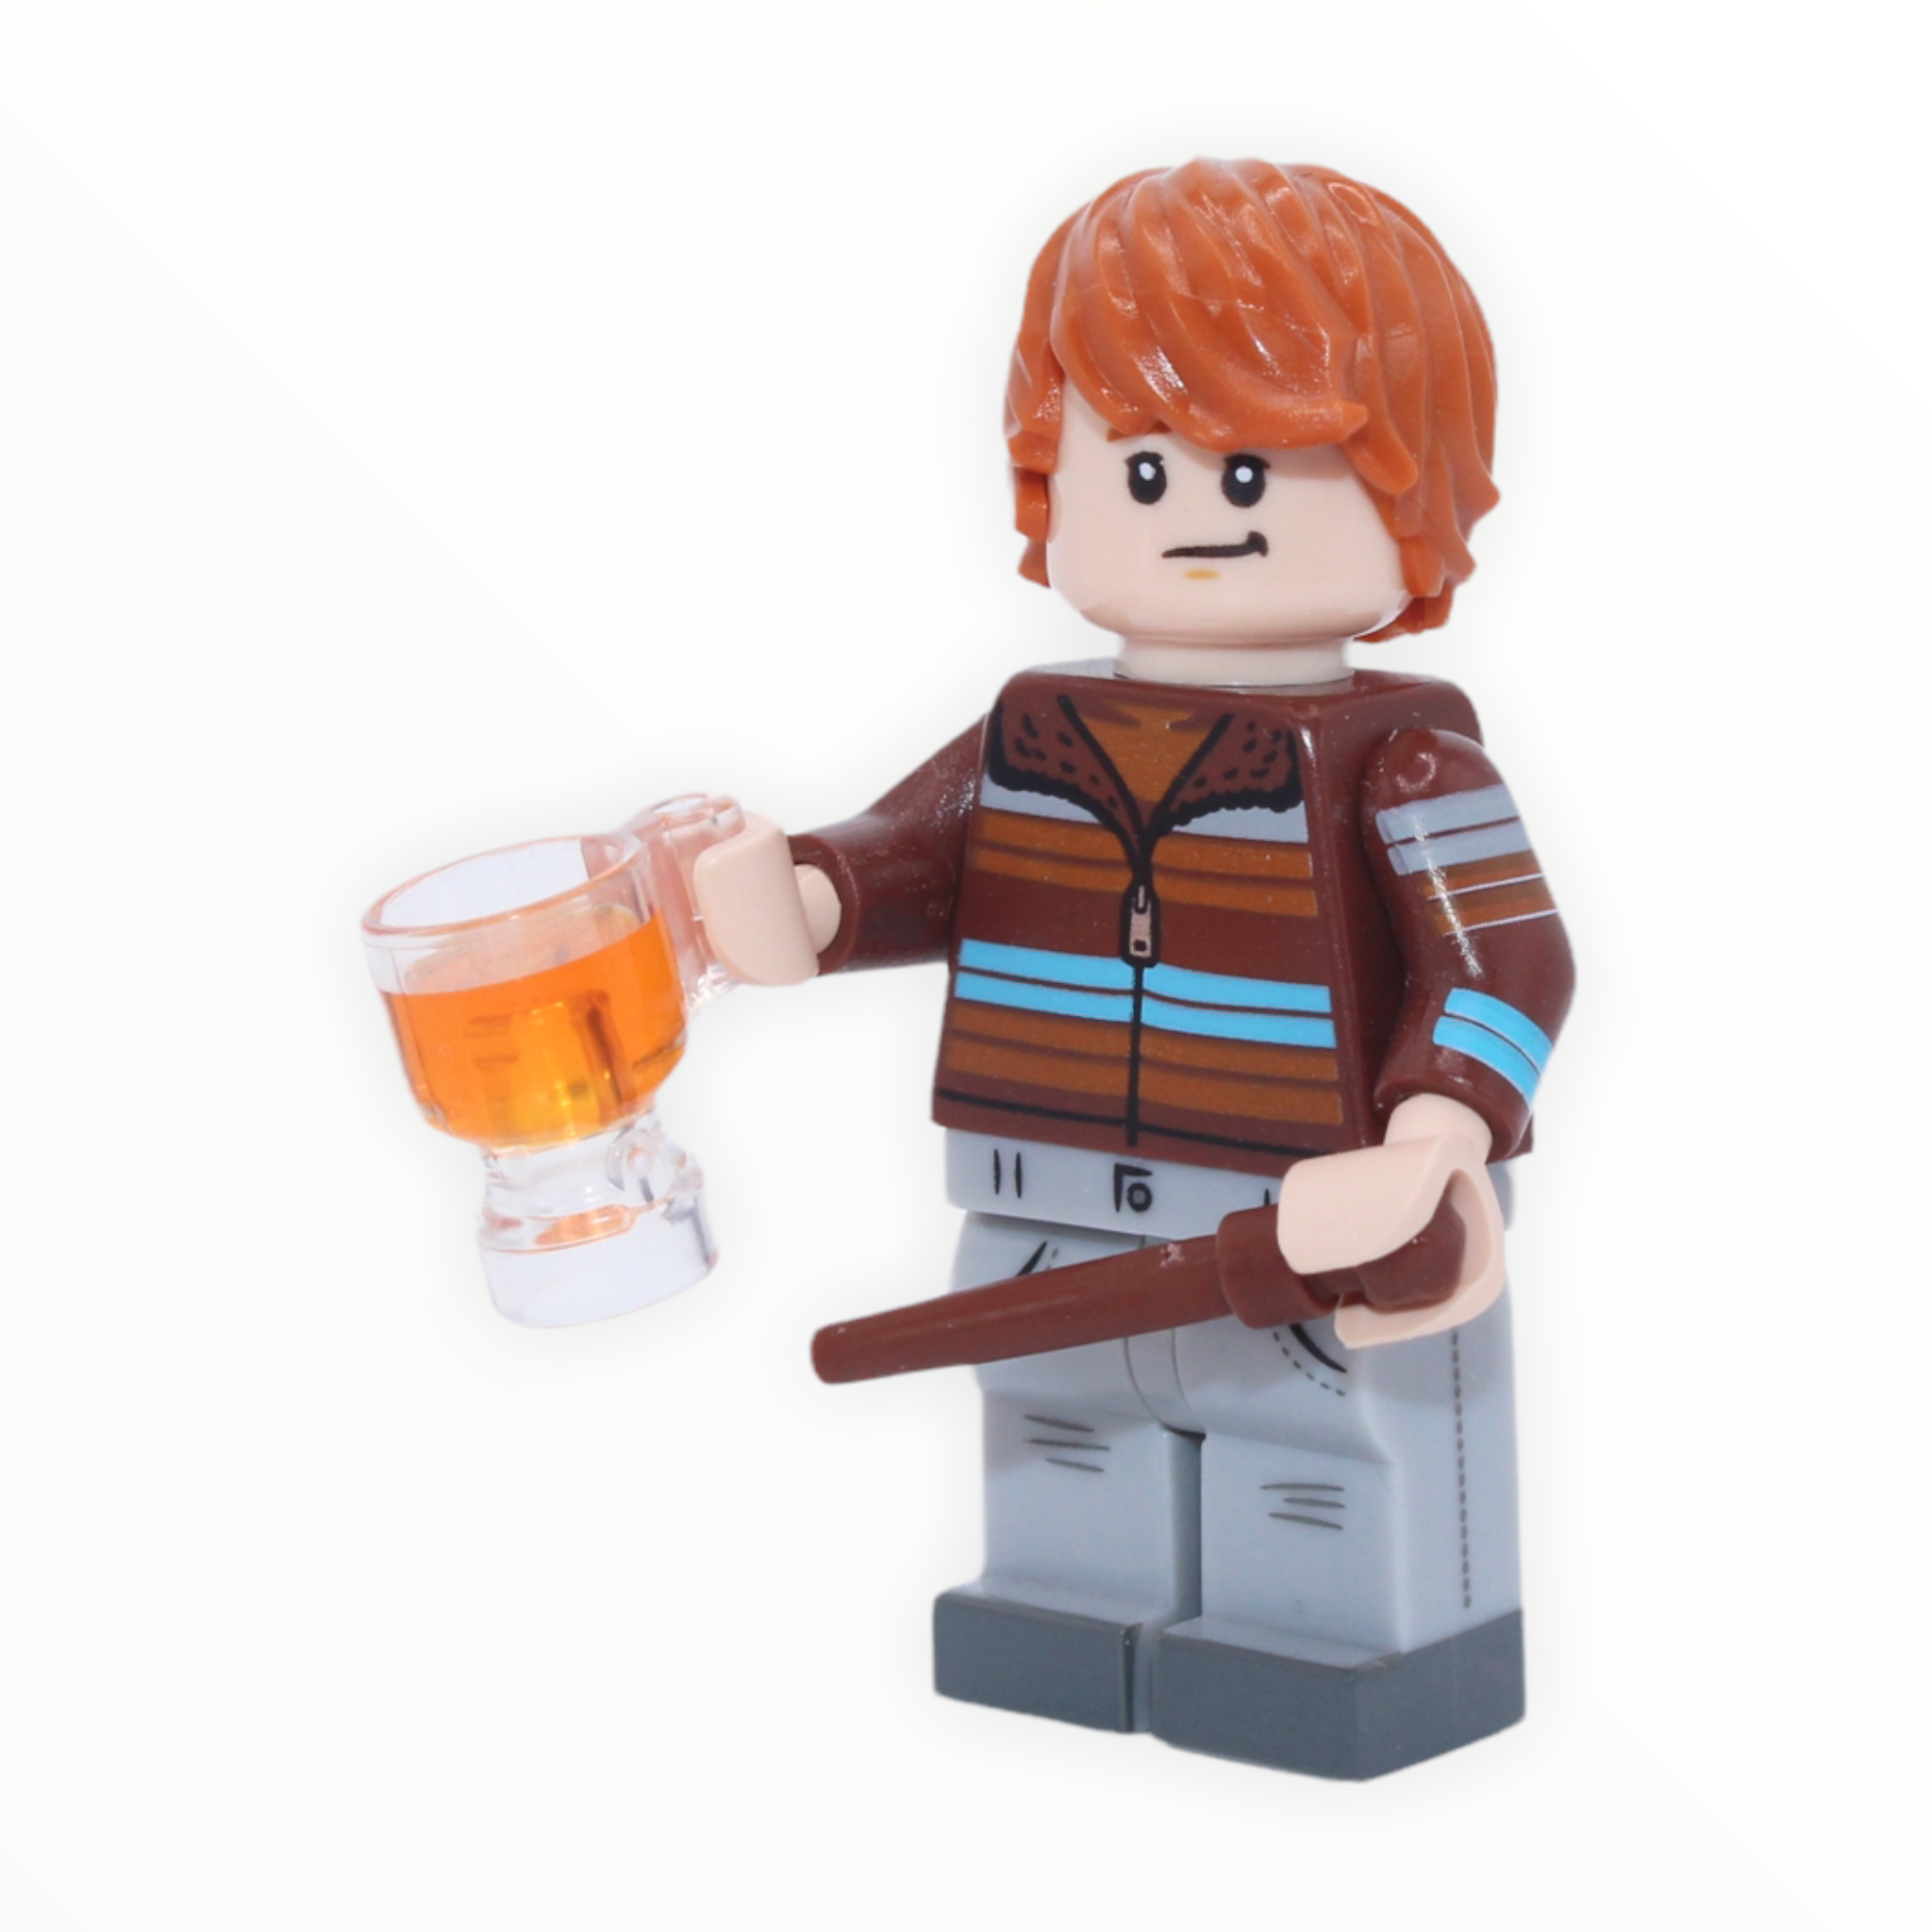 Harry Potter Series 2: Ron Weasley with Butterbeer